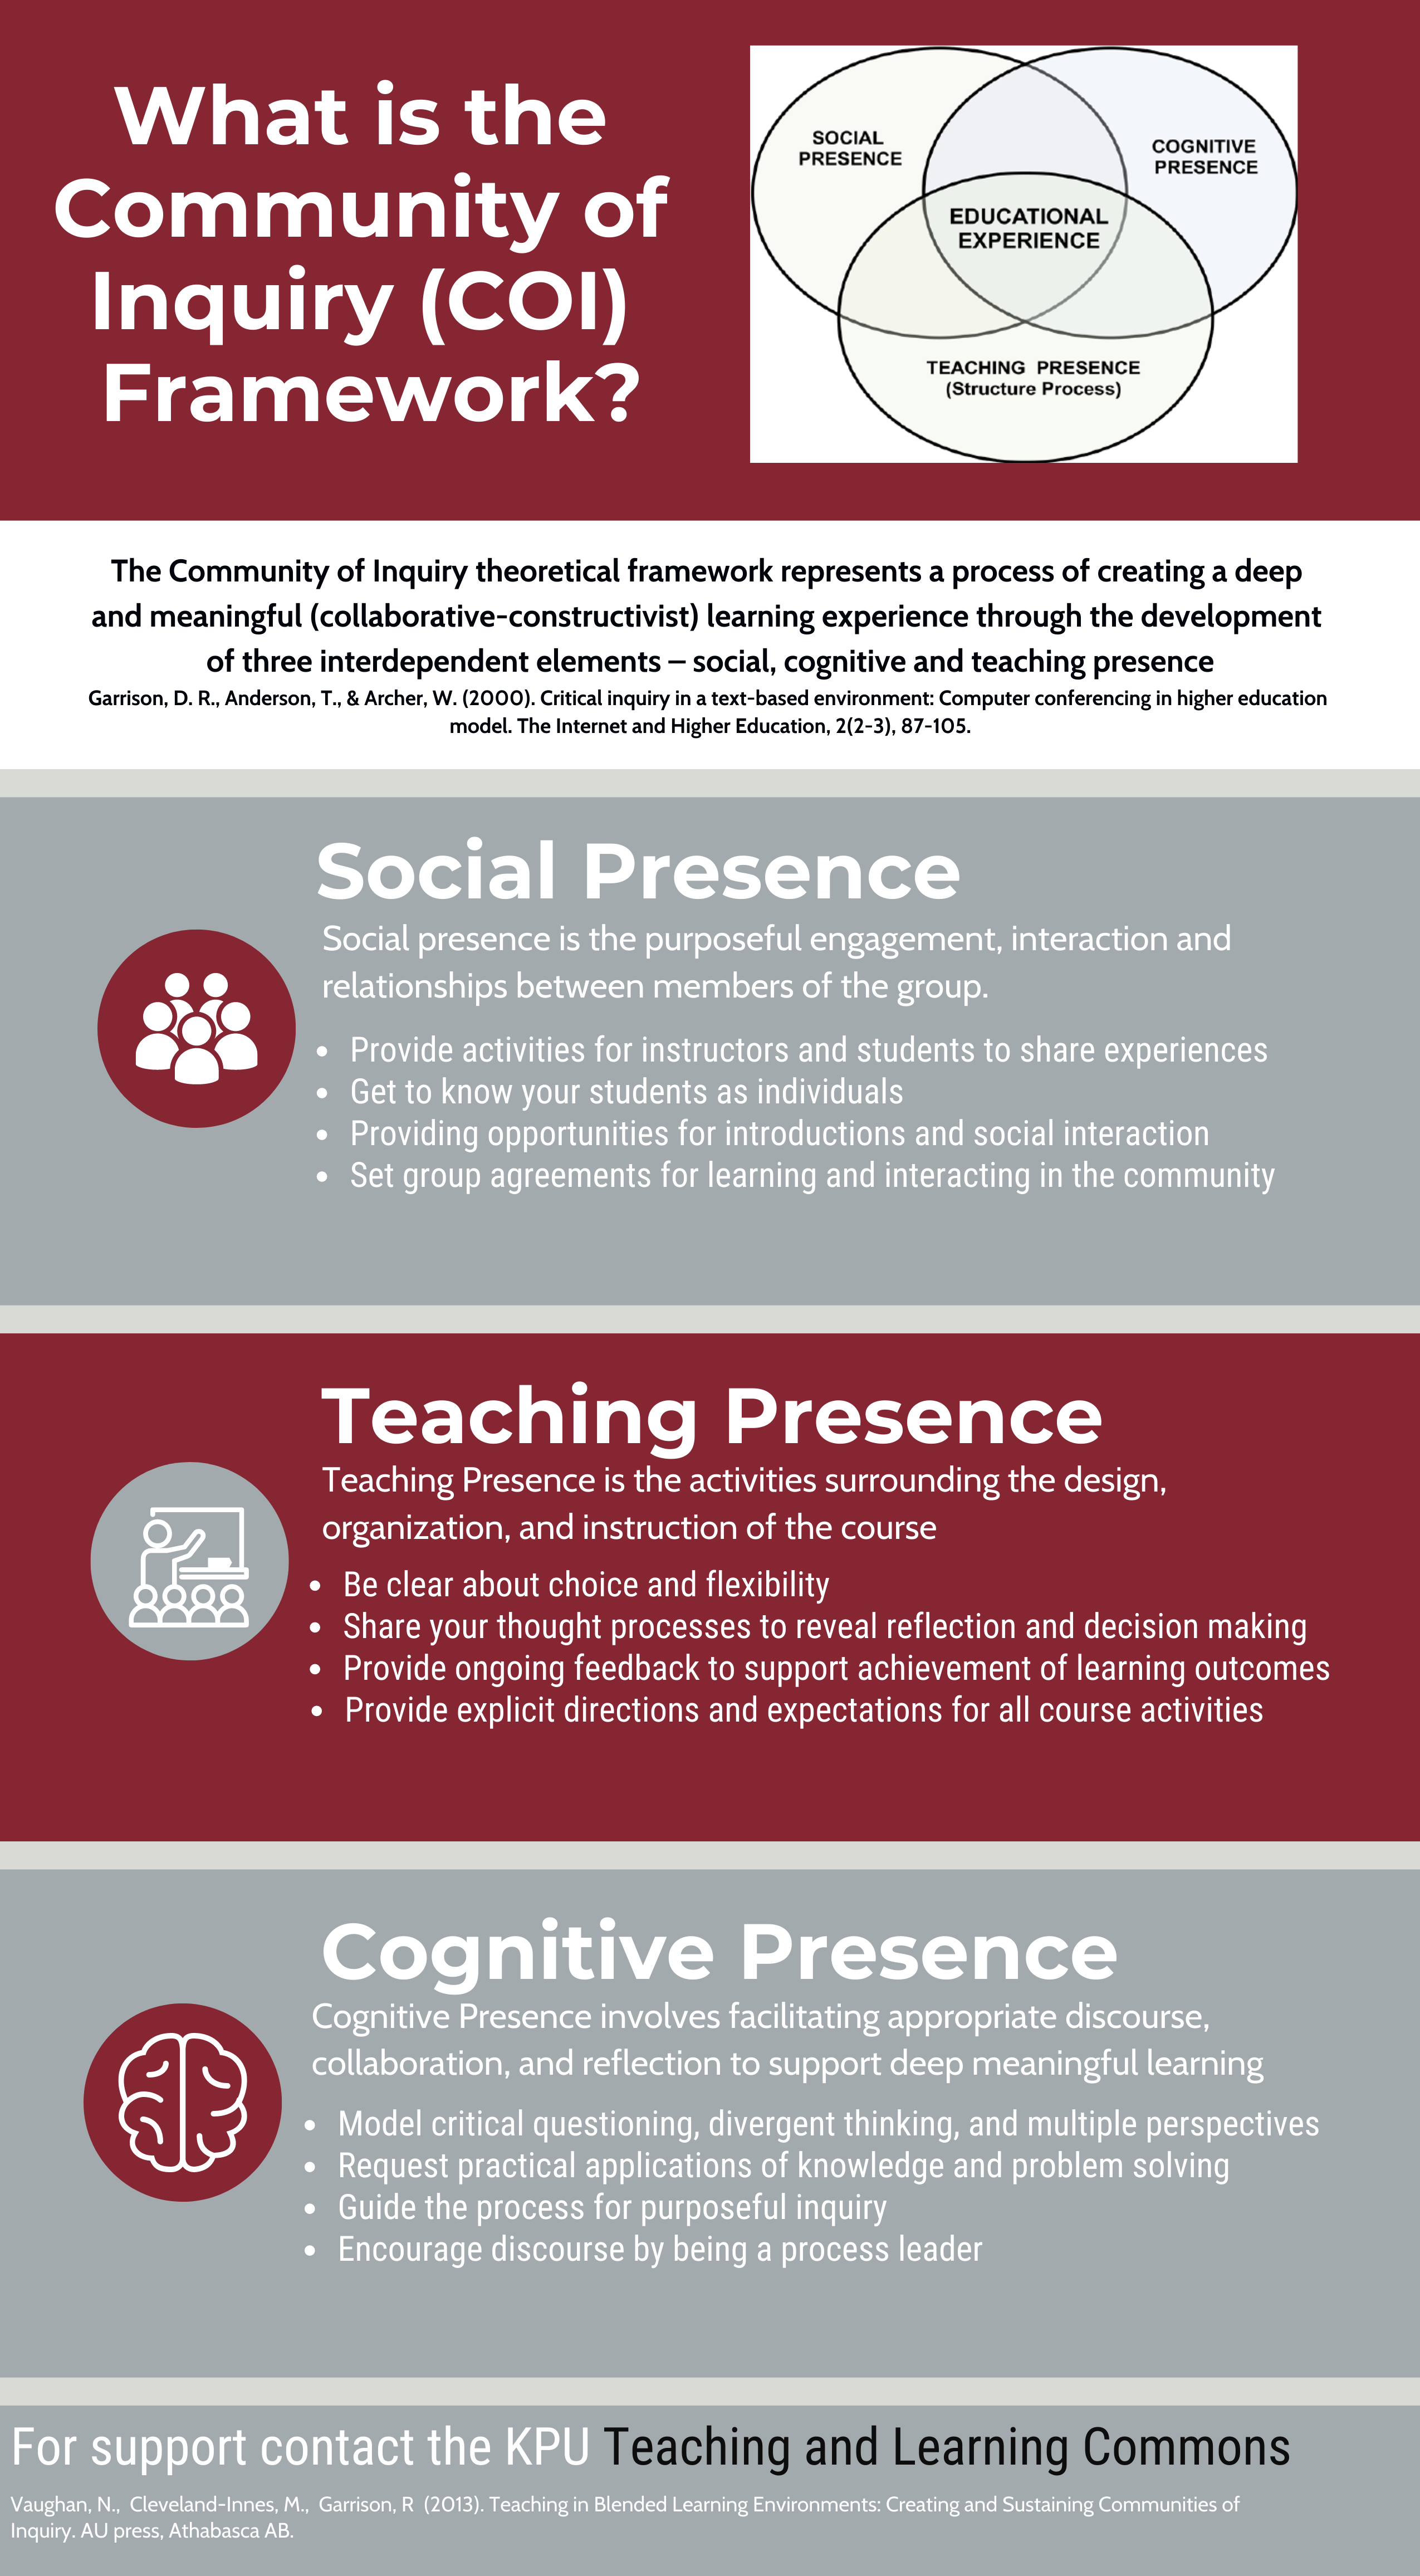 An infographic describing the Community of Inquiry (COI) Framework and how it can be used to create deeper learning experiences